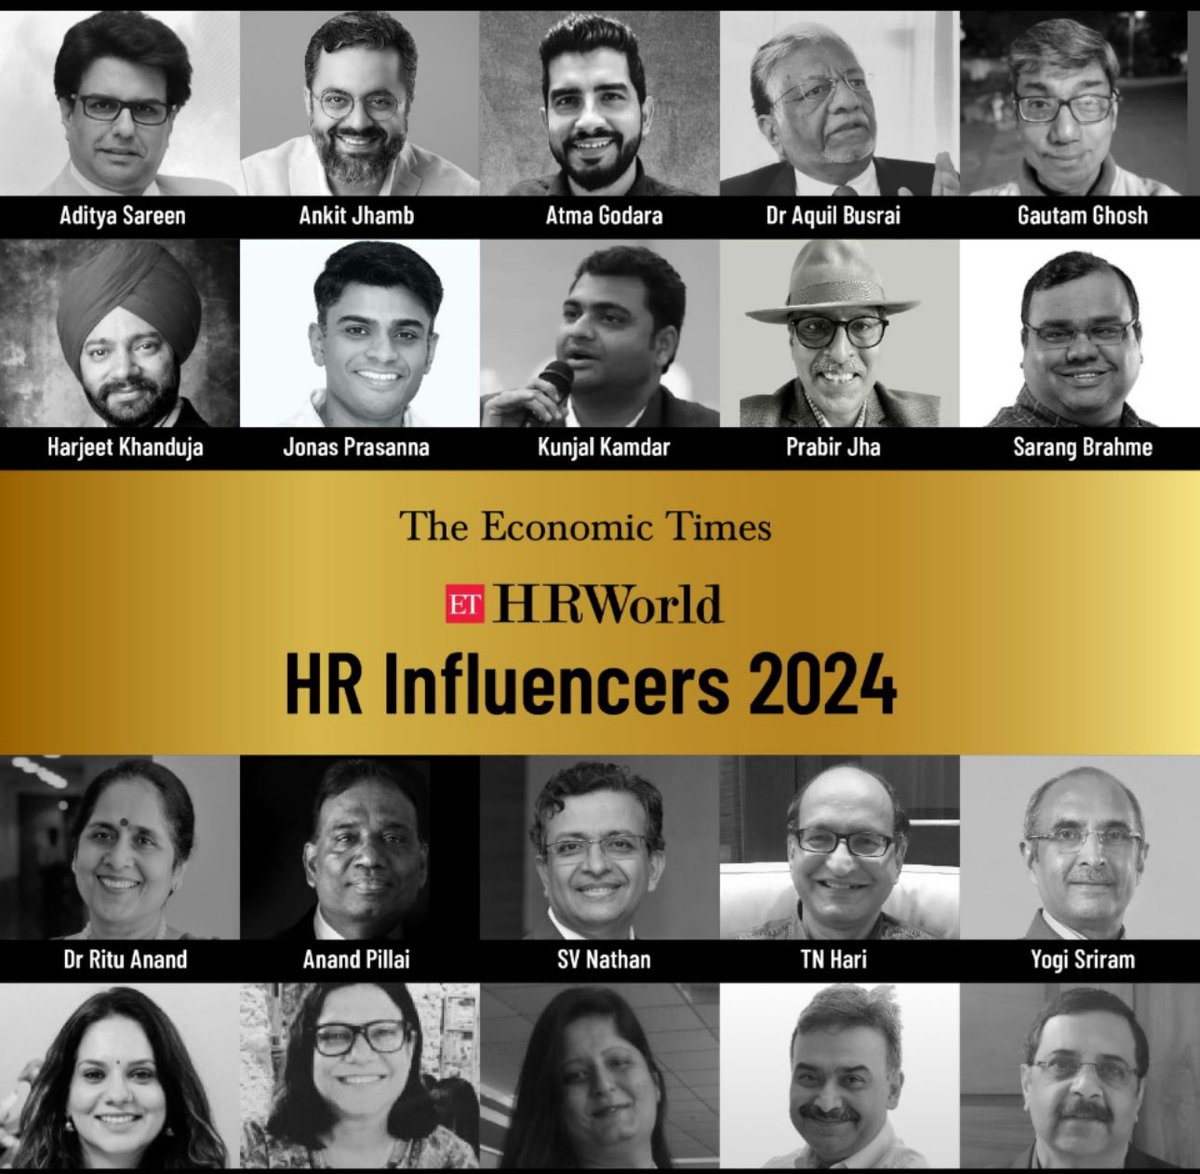 Another year. Another list. Many friends. Many congratulations to everyone. I do hope we truly are influencing employers, organisations, individuals and the world get better. More power to that purpose. #PrabirInsights #HRInfluencers2024 lnkd.in/dAzWGZiP